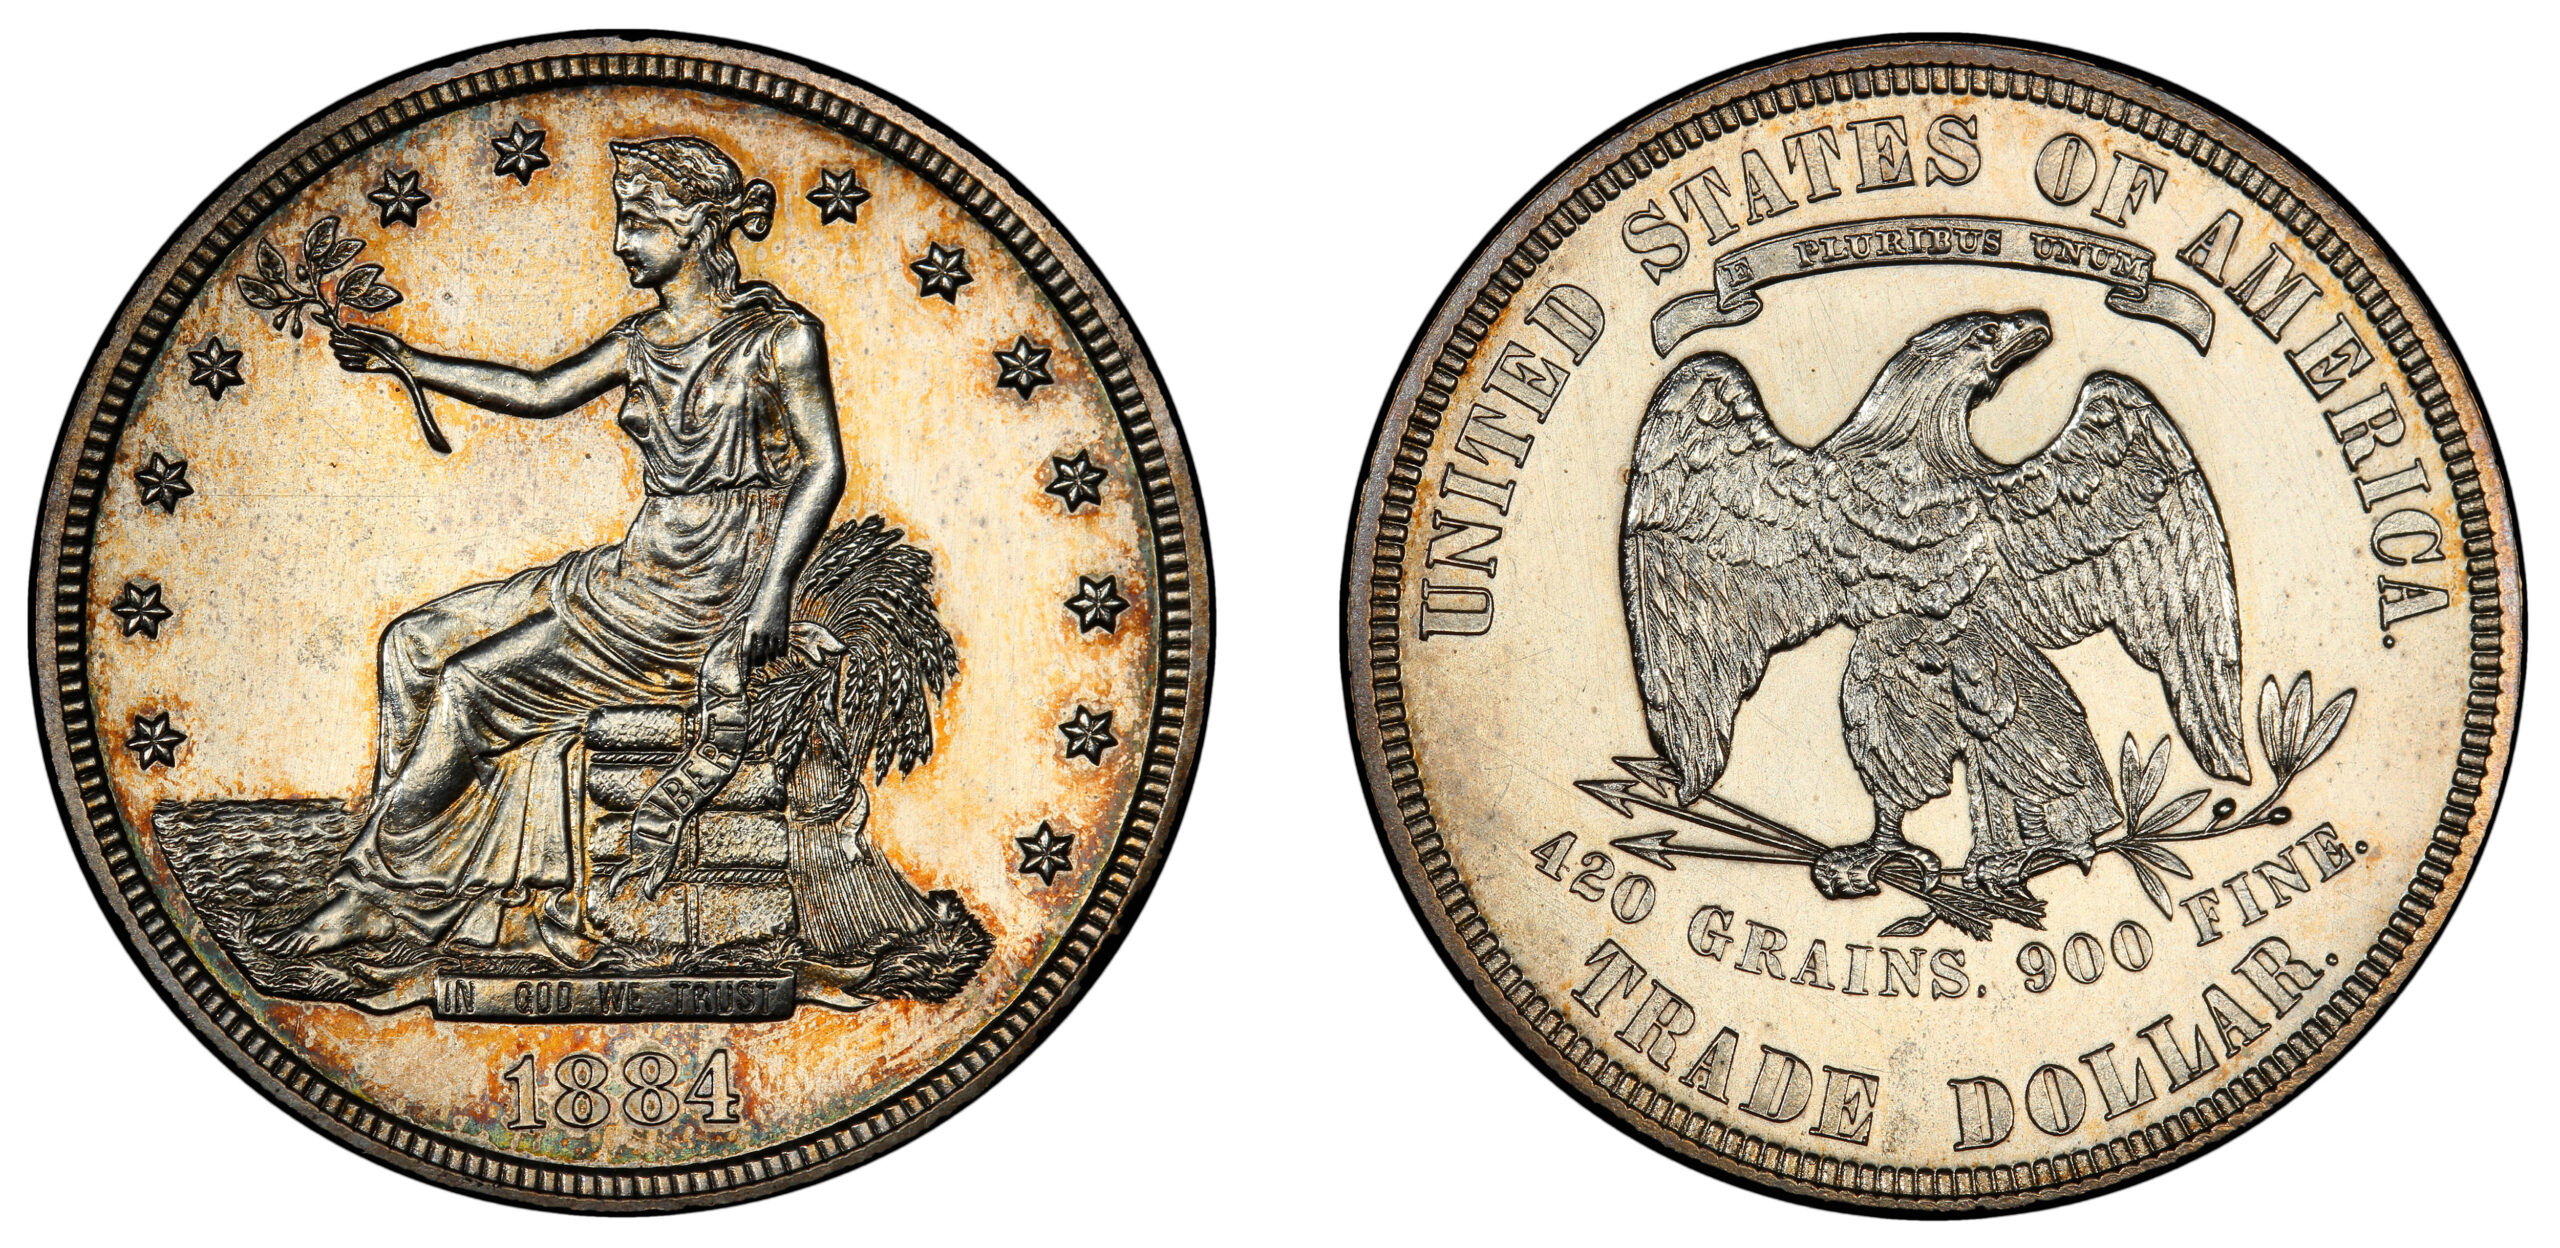 1884 Trade Dollar Judd to show obverse and reverse design